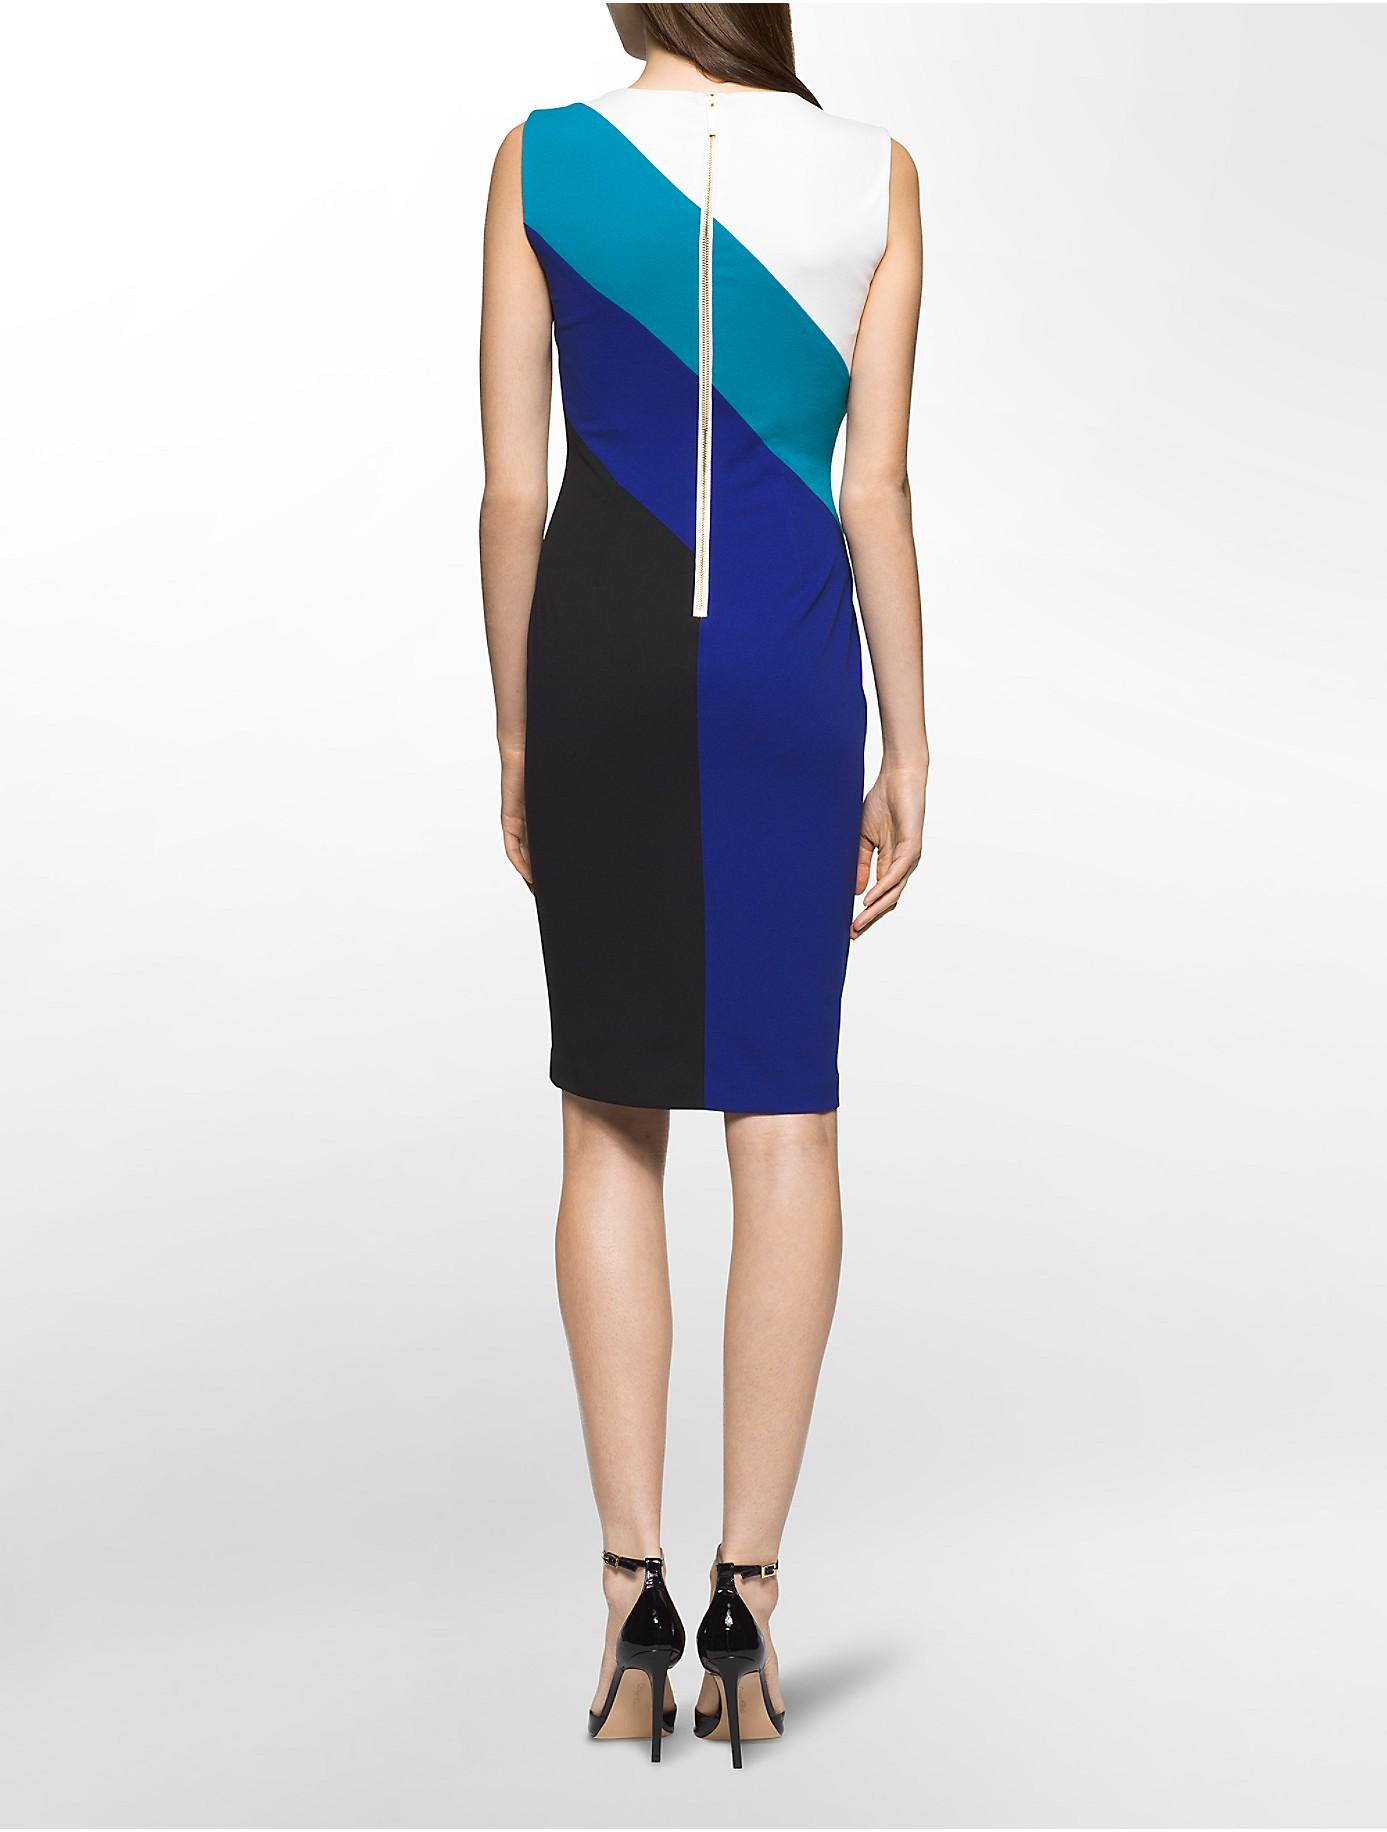 Calvin Klein Synthetic Colorblocked Sheath Dress in Blue - Lyst